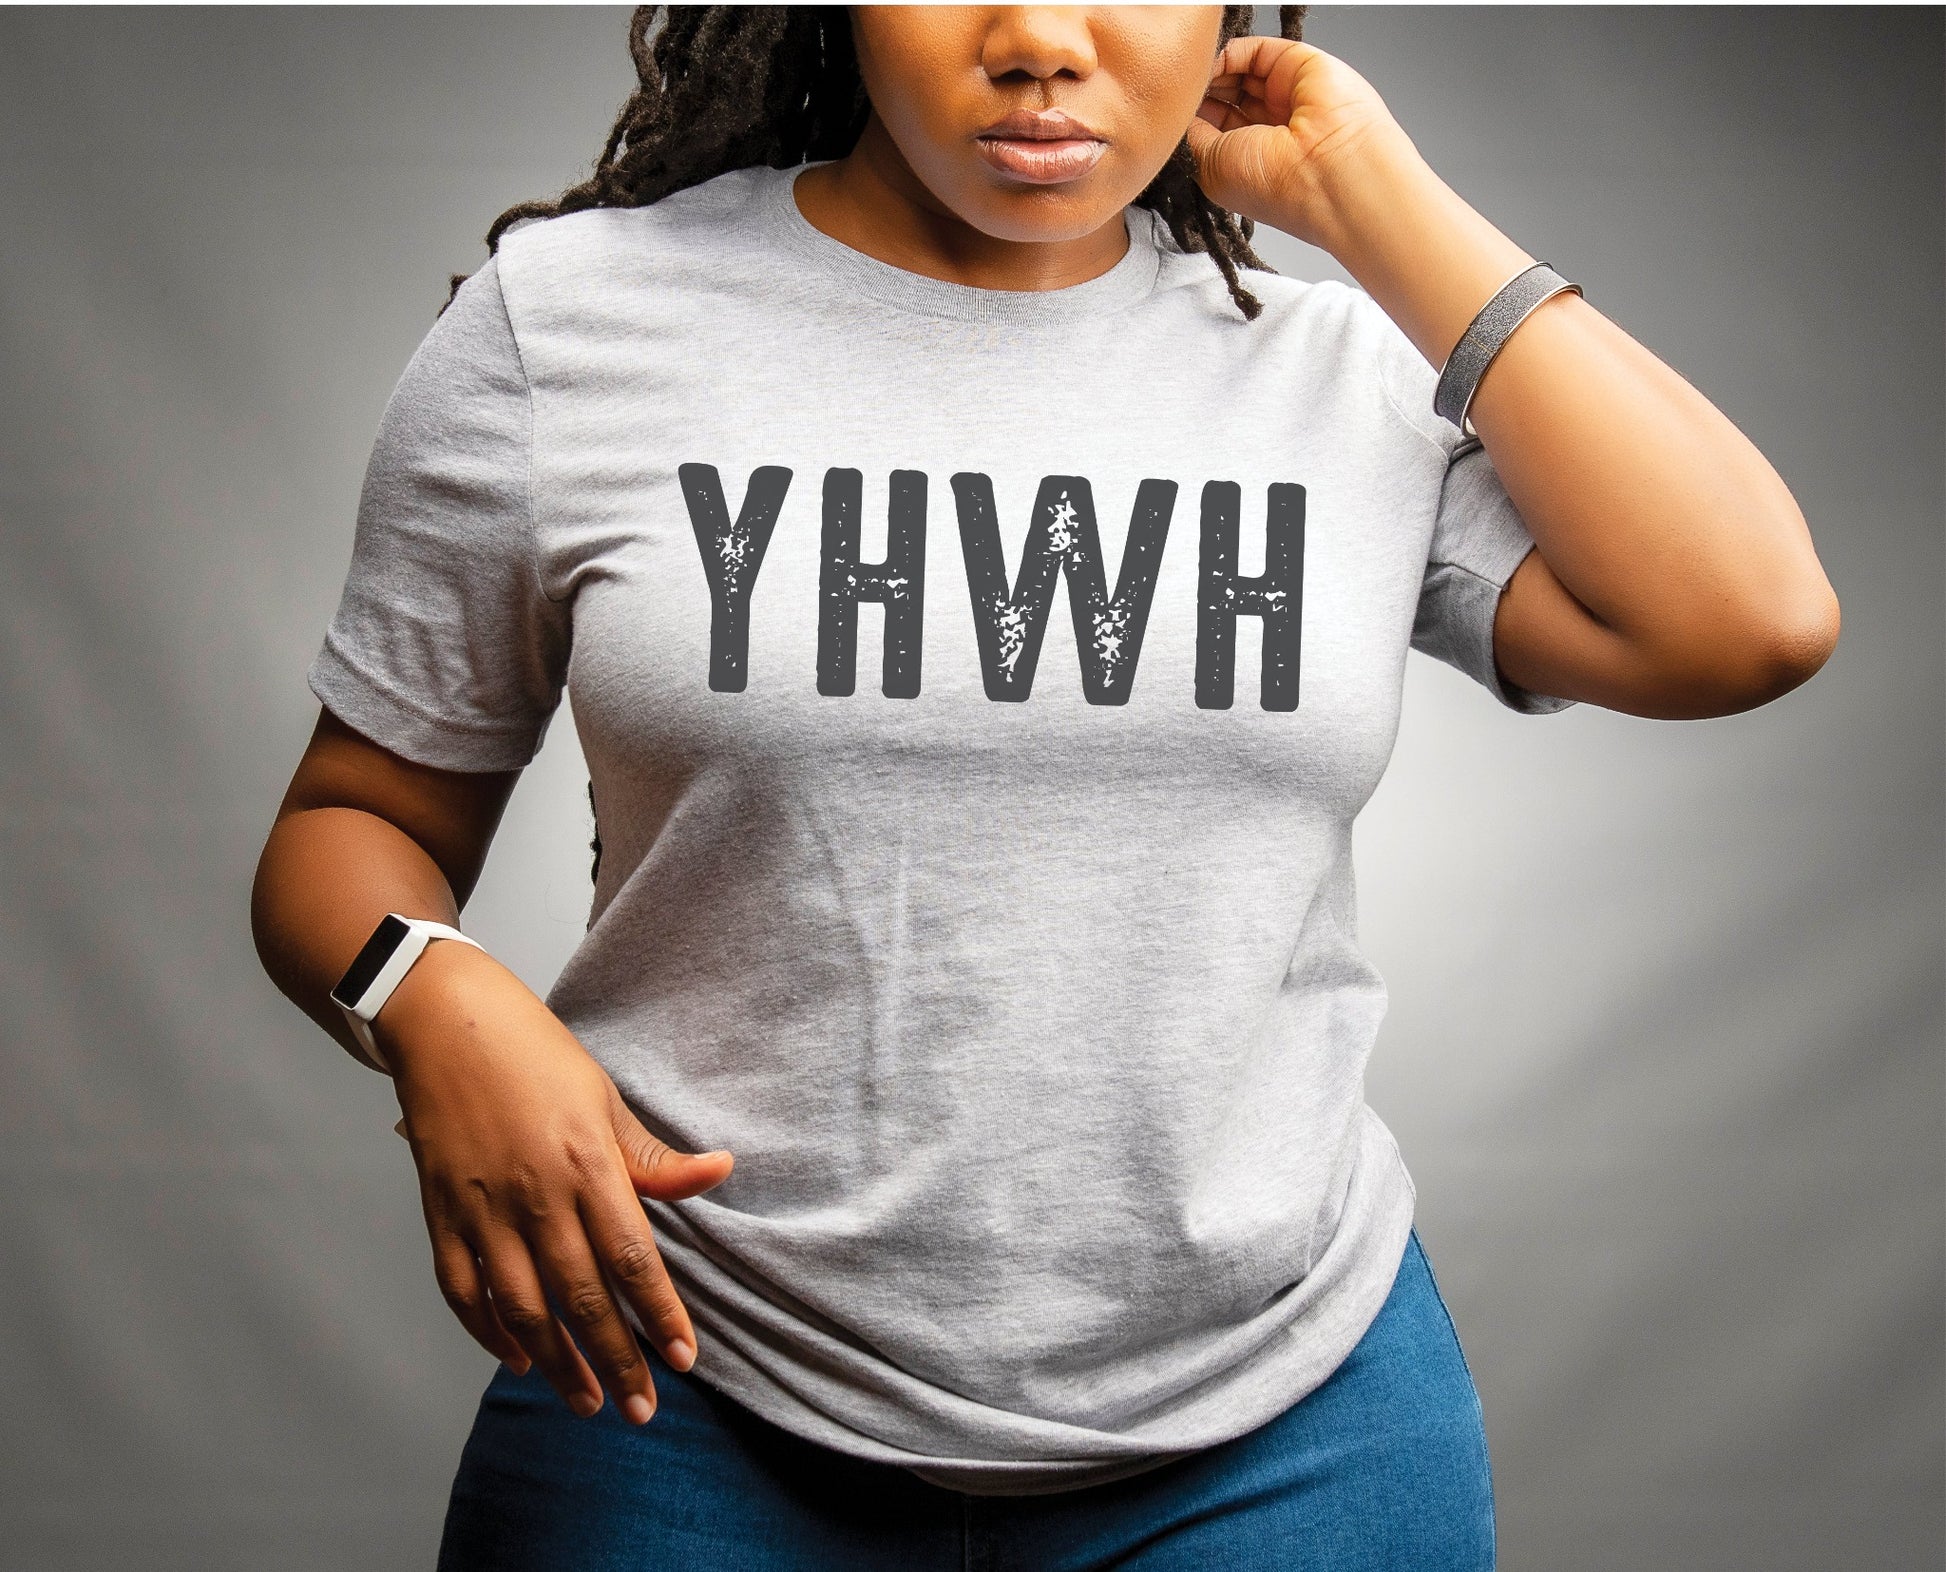 YHWH Hebrew Biblical Name of God Yahweh Christian aesthetic distressed design printed in charcoal on soft heather gray unisex t-shirt for women